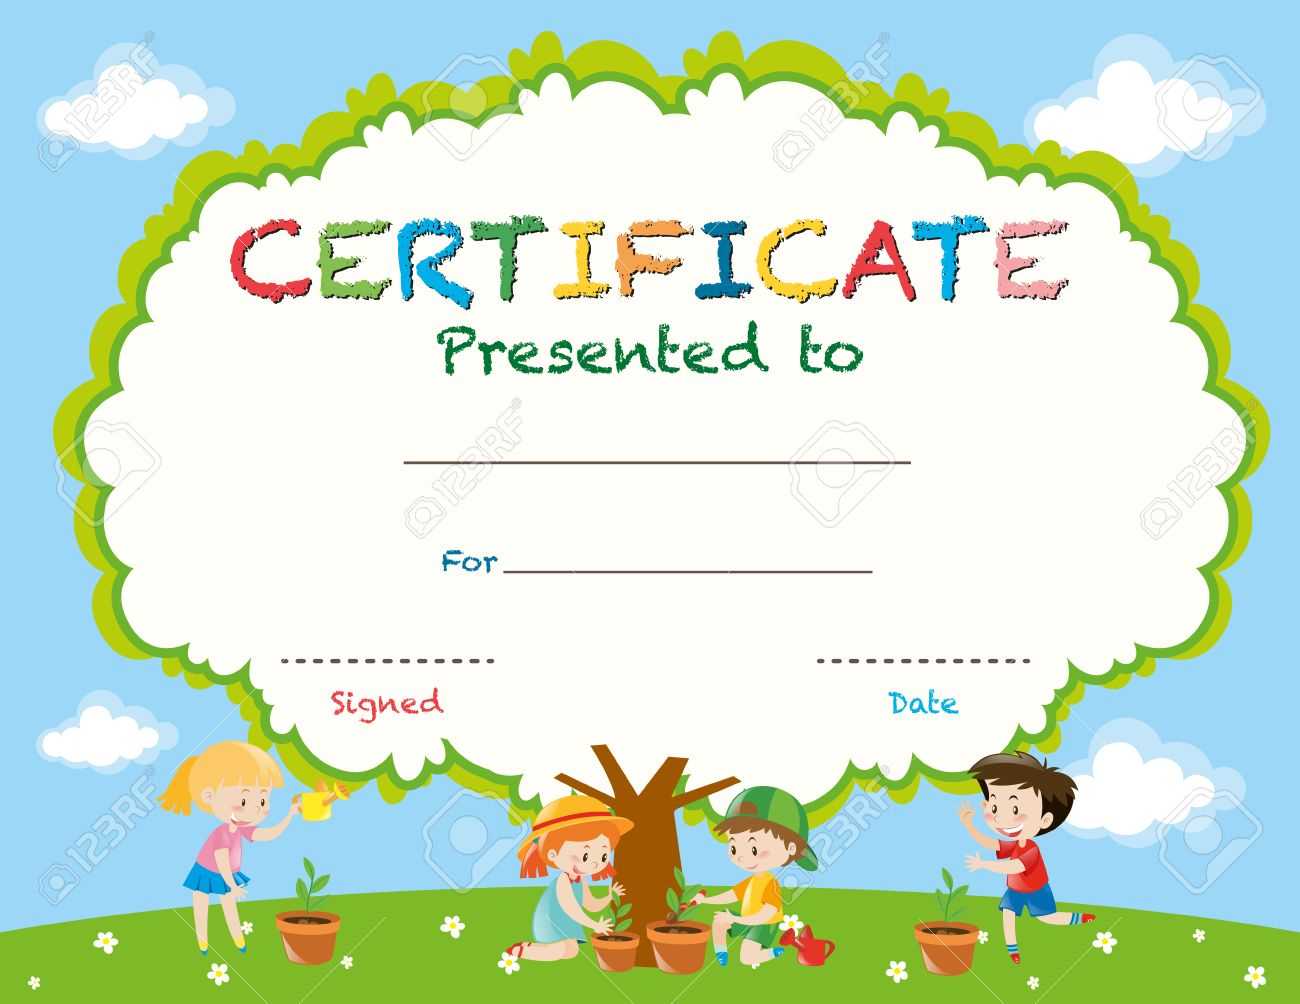 Swimming Certificate Templates Free ] – Certificate Template Intended For Free Swimming Certificate Templates